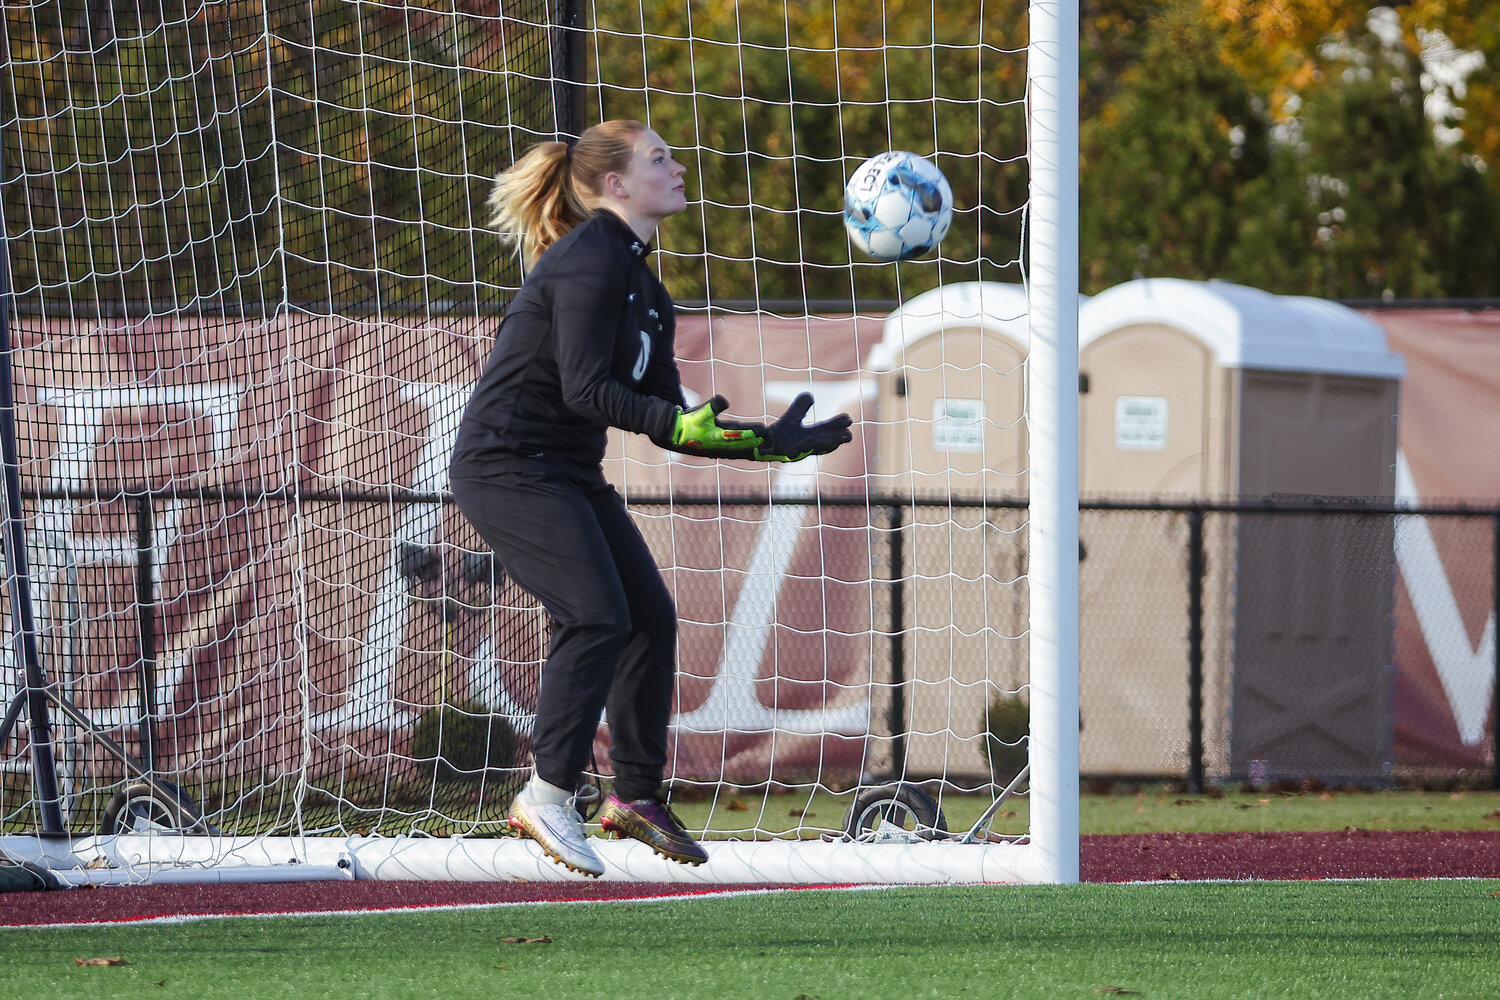 Senior goalkeeper Eve Fitzpatrick was outstanding in net for the Patriots, giving up only one goal — on a meaningless garbage-time penalty kick.